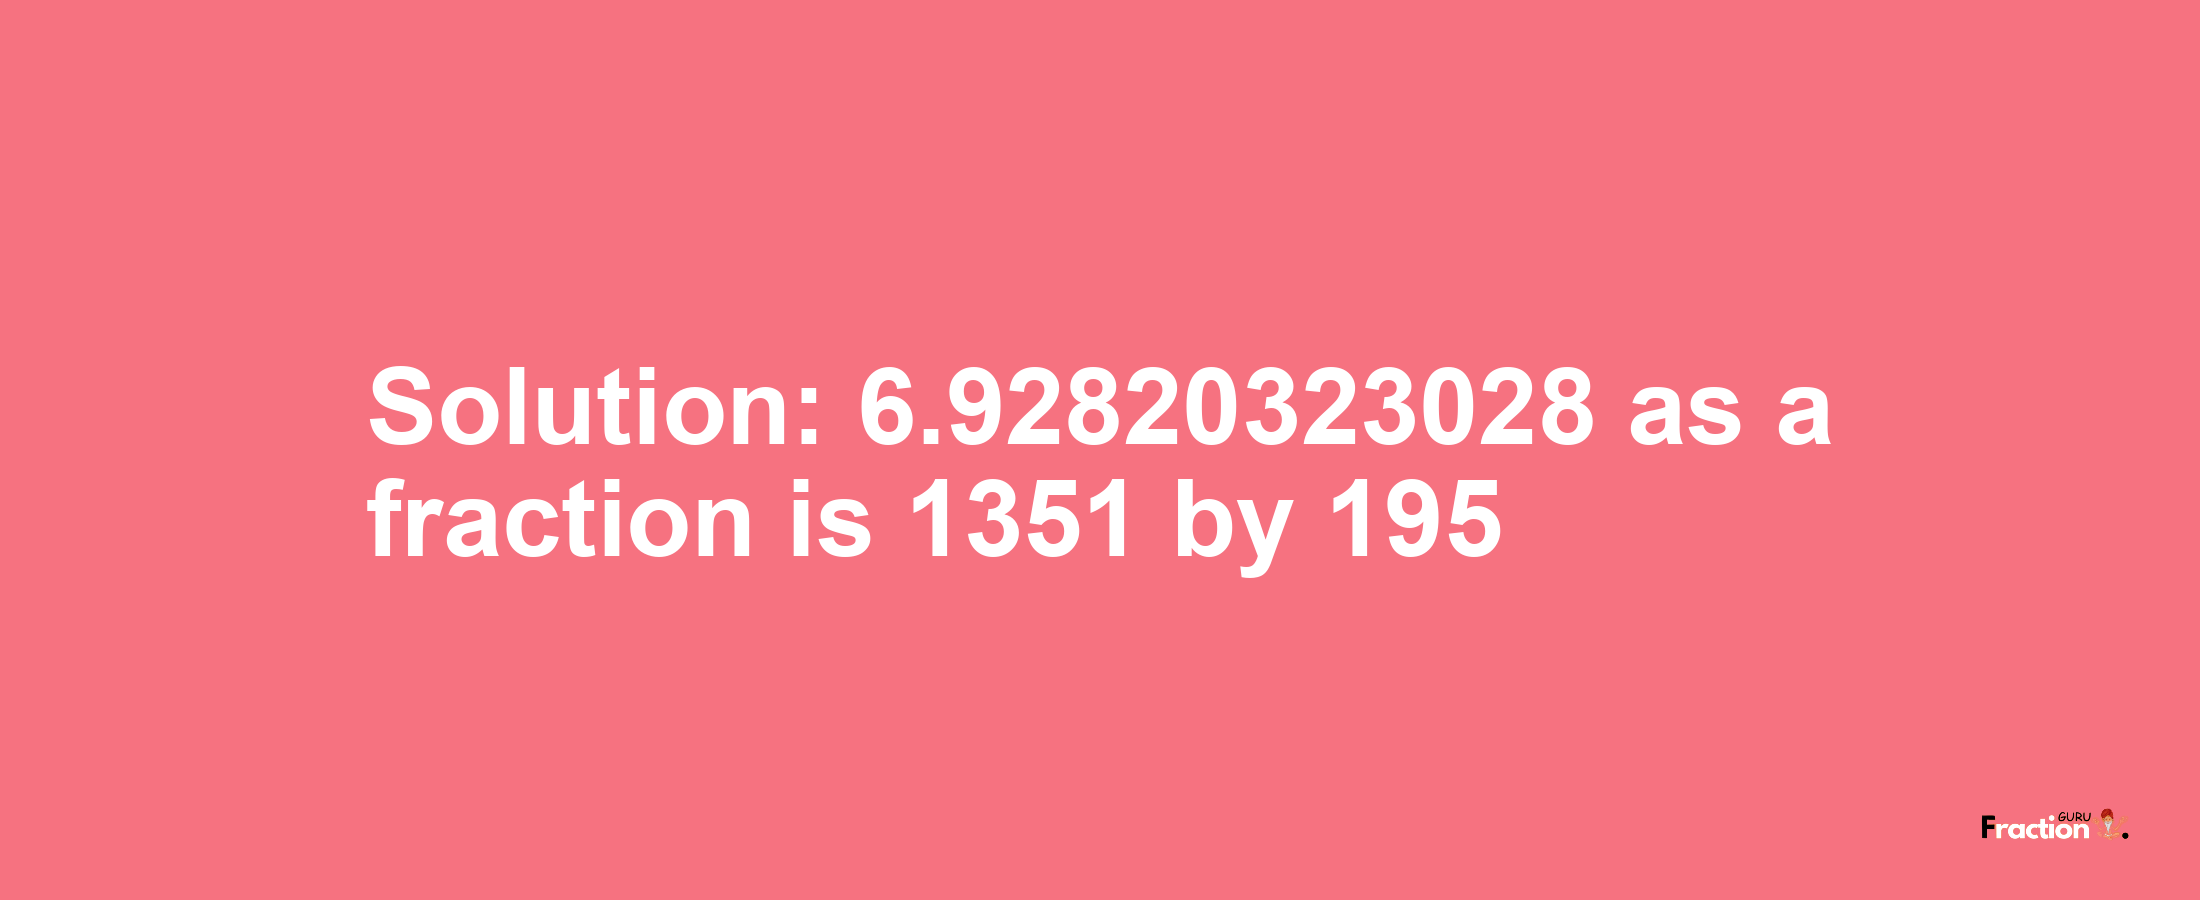 Solution:6.92820323028 as a fraction is 1351/195